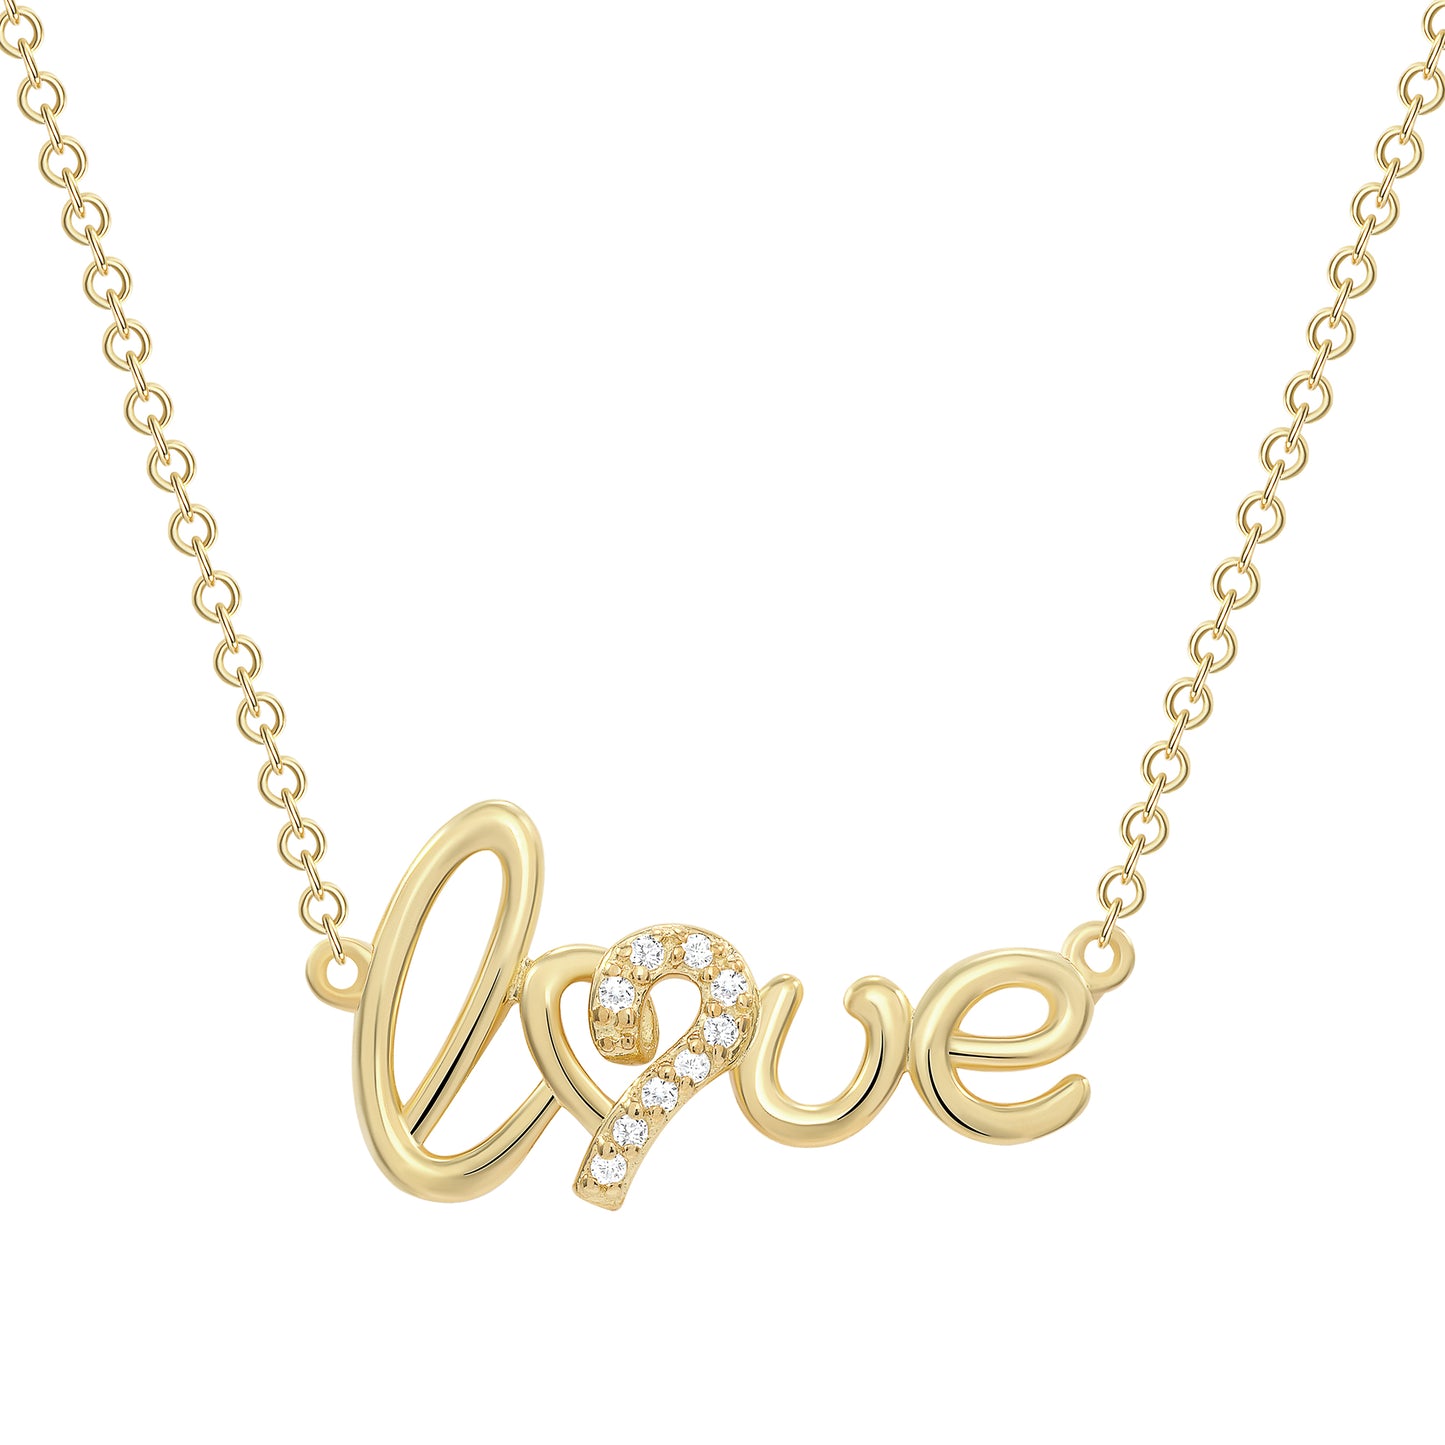 Silver  925 Gold Plated Cubic Zirconia Love Necklace. BN2923GP